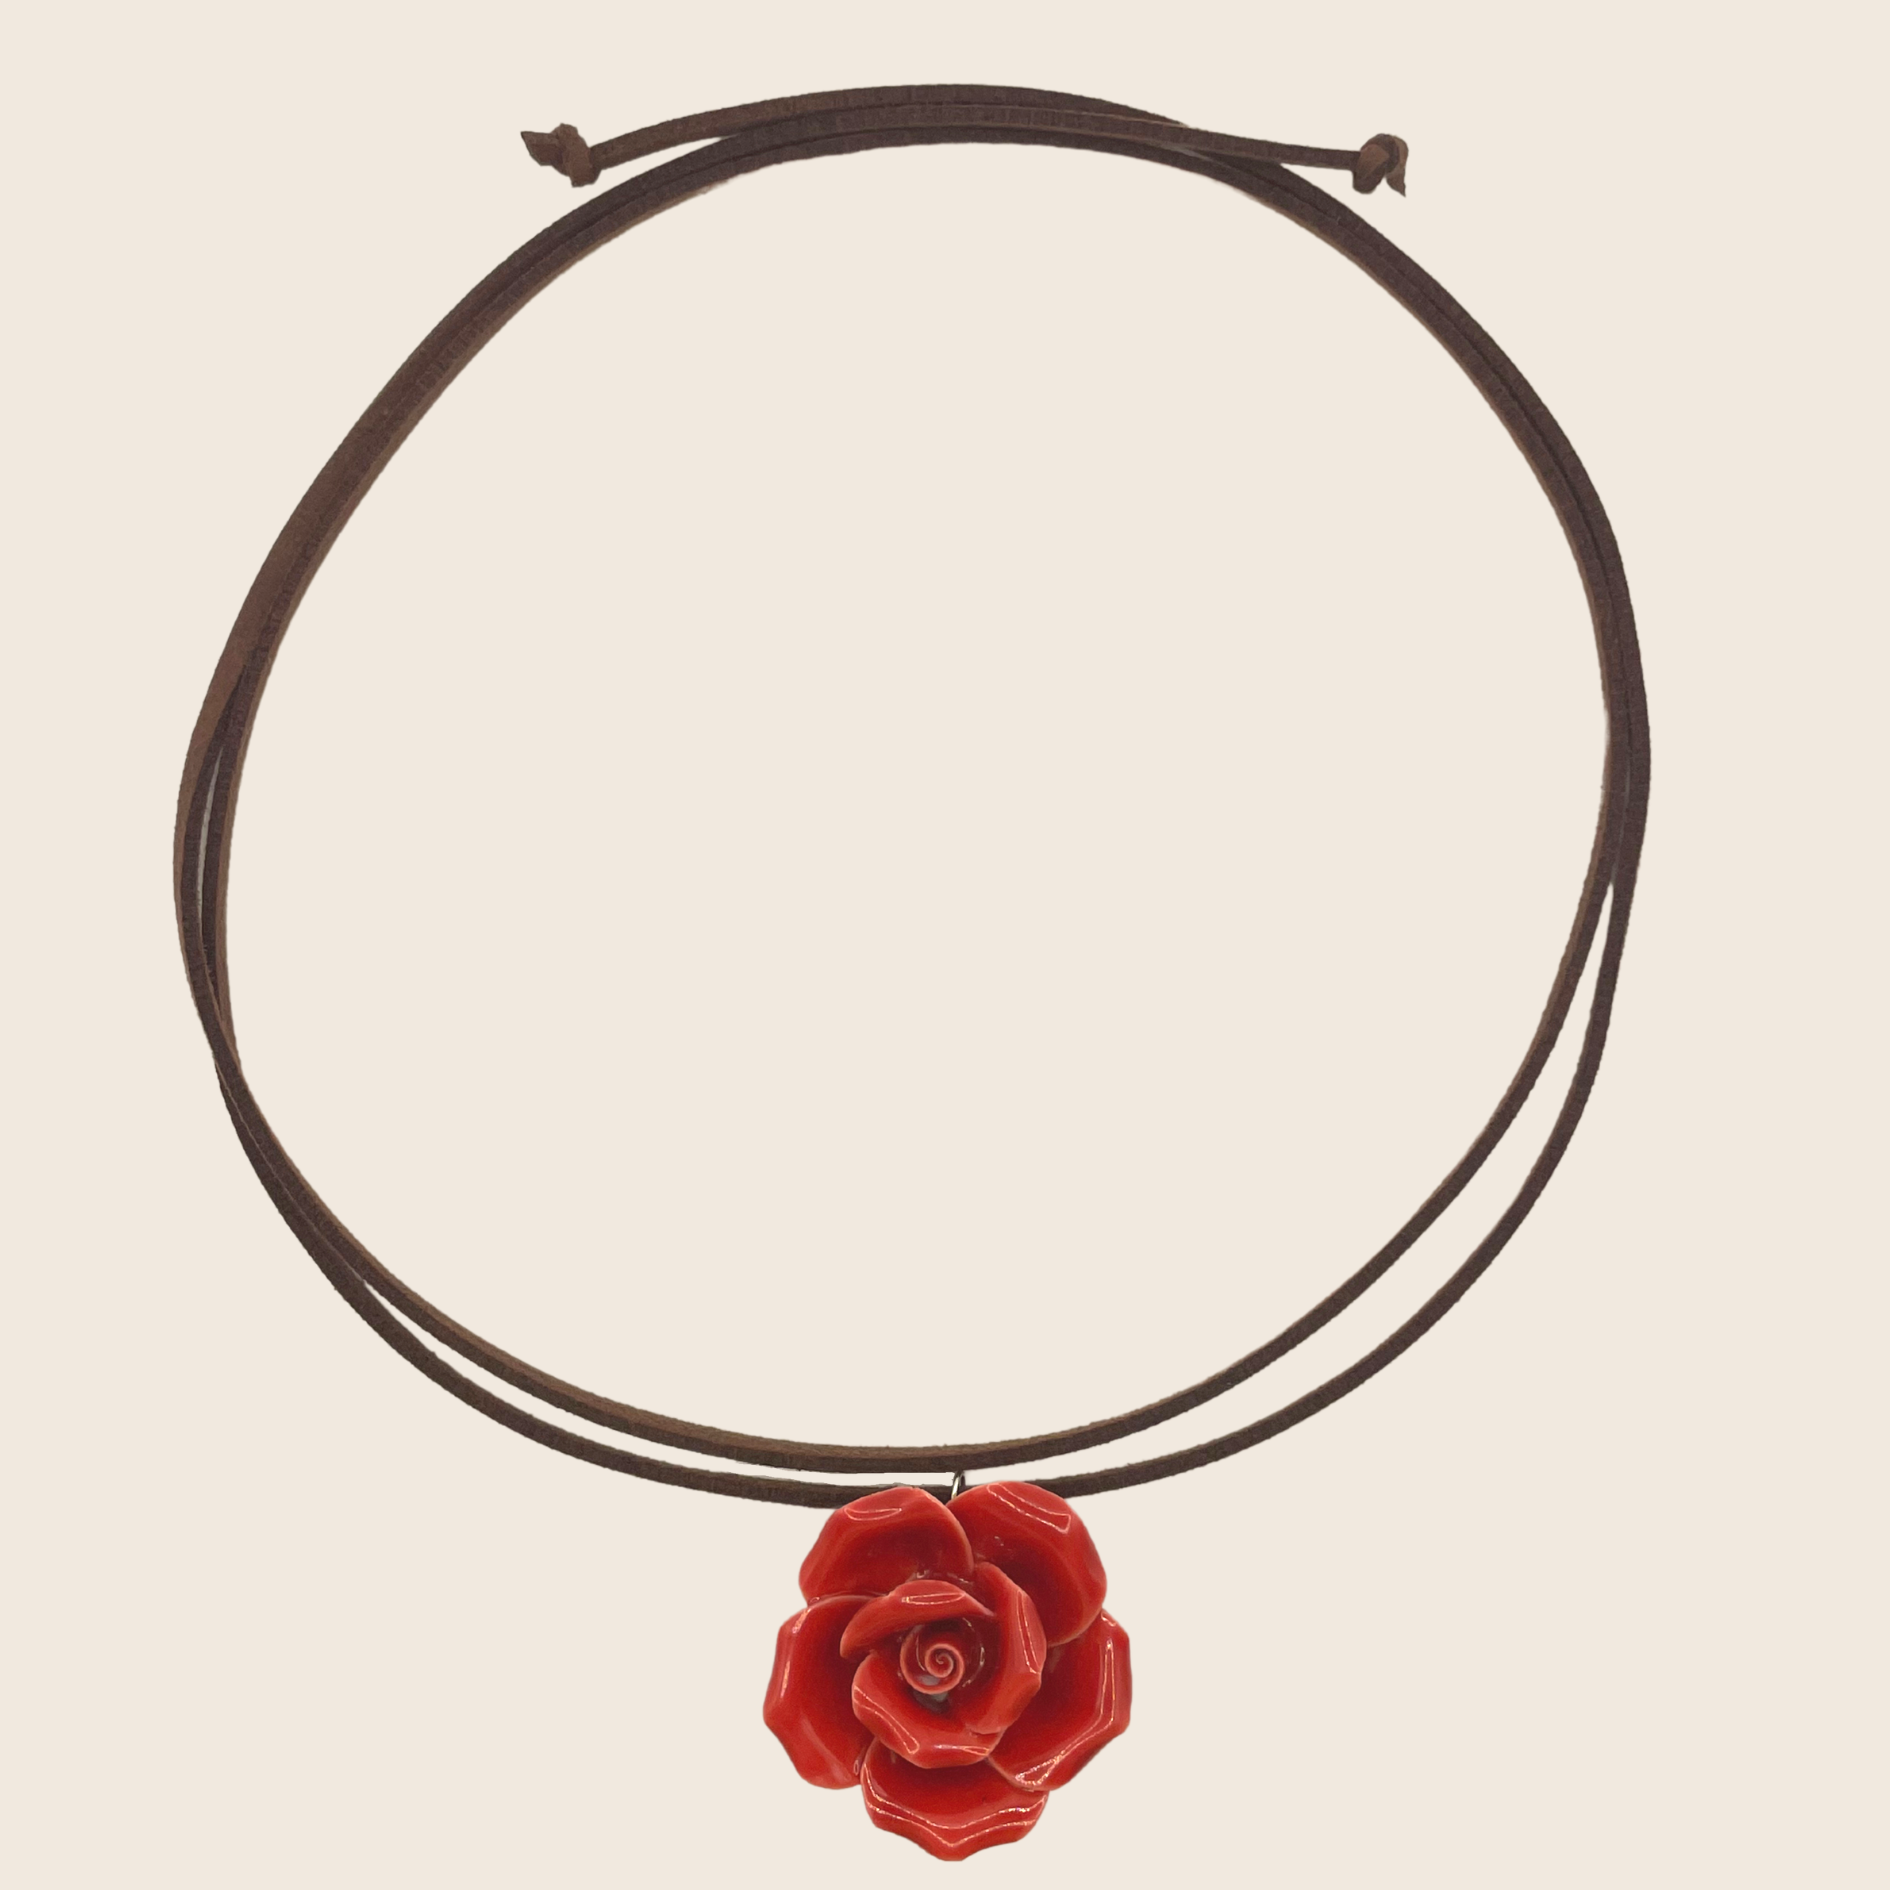 Red Rose Necklace - Lemon Lua Red Rose Necklace Lemon Lua Lemon Lua Red Rose Necklace Red Rose Necklace